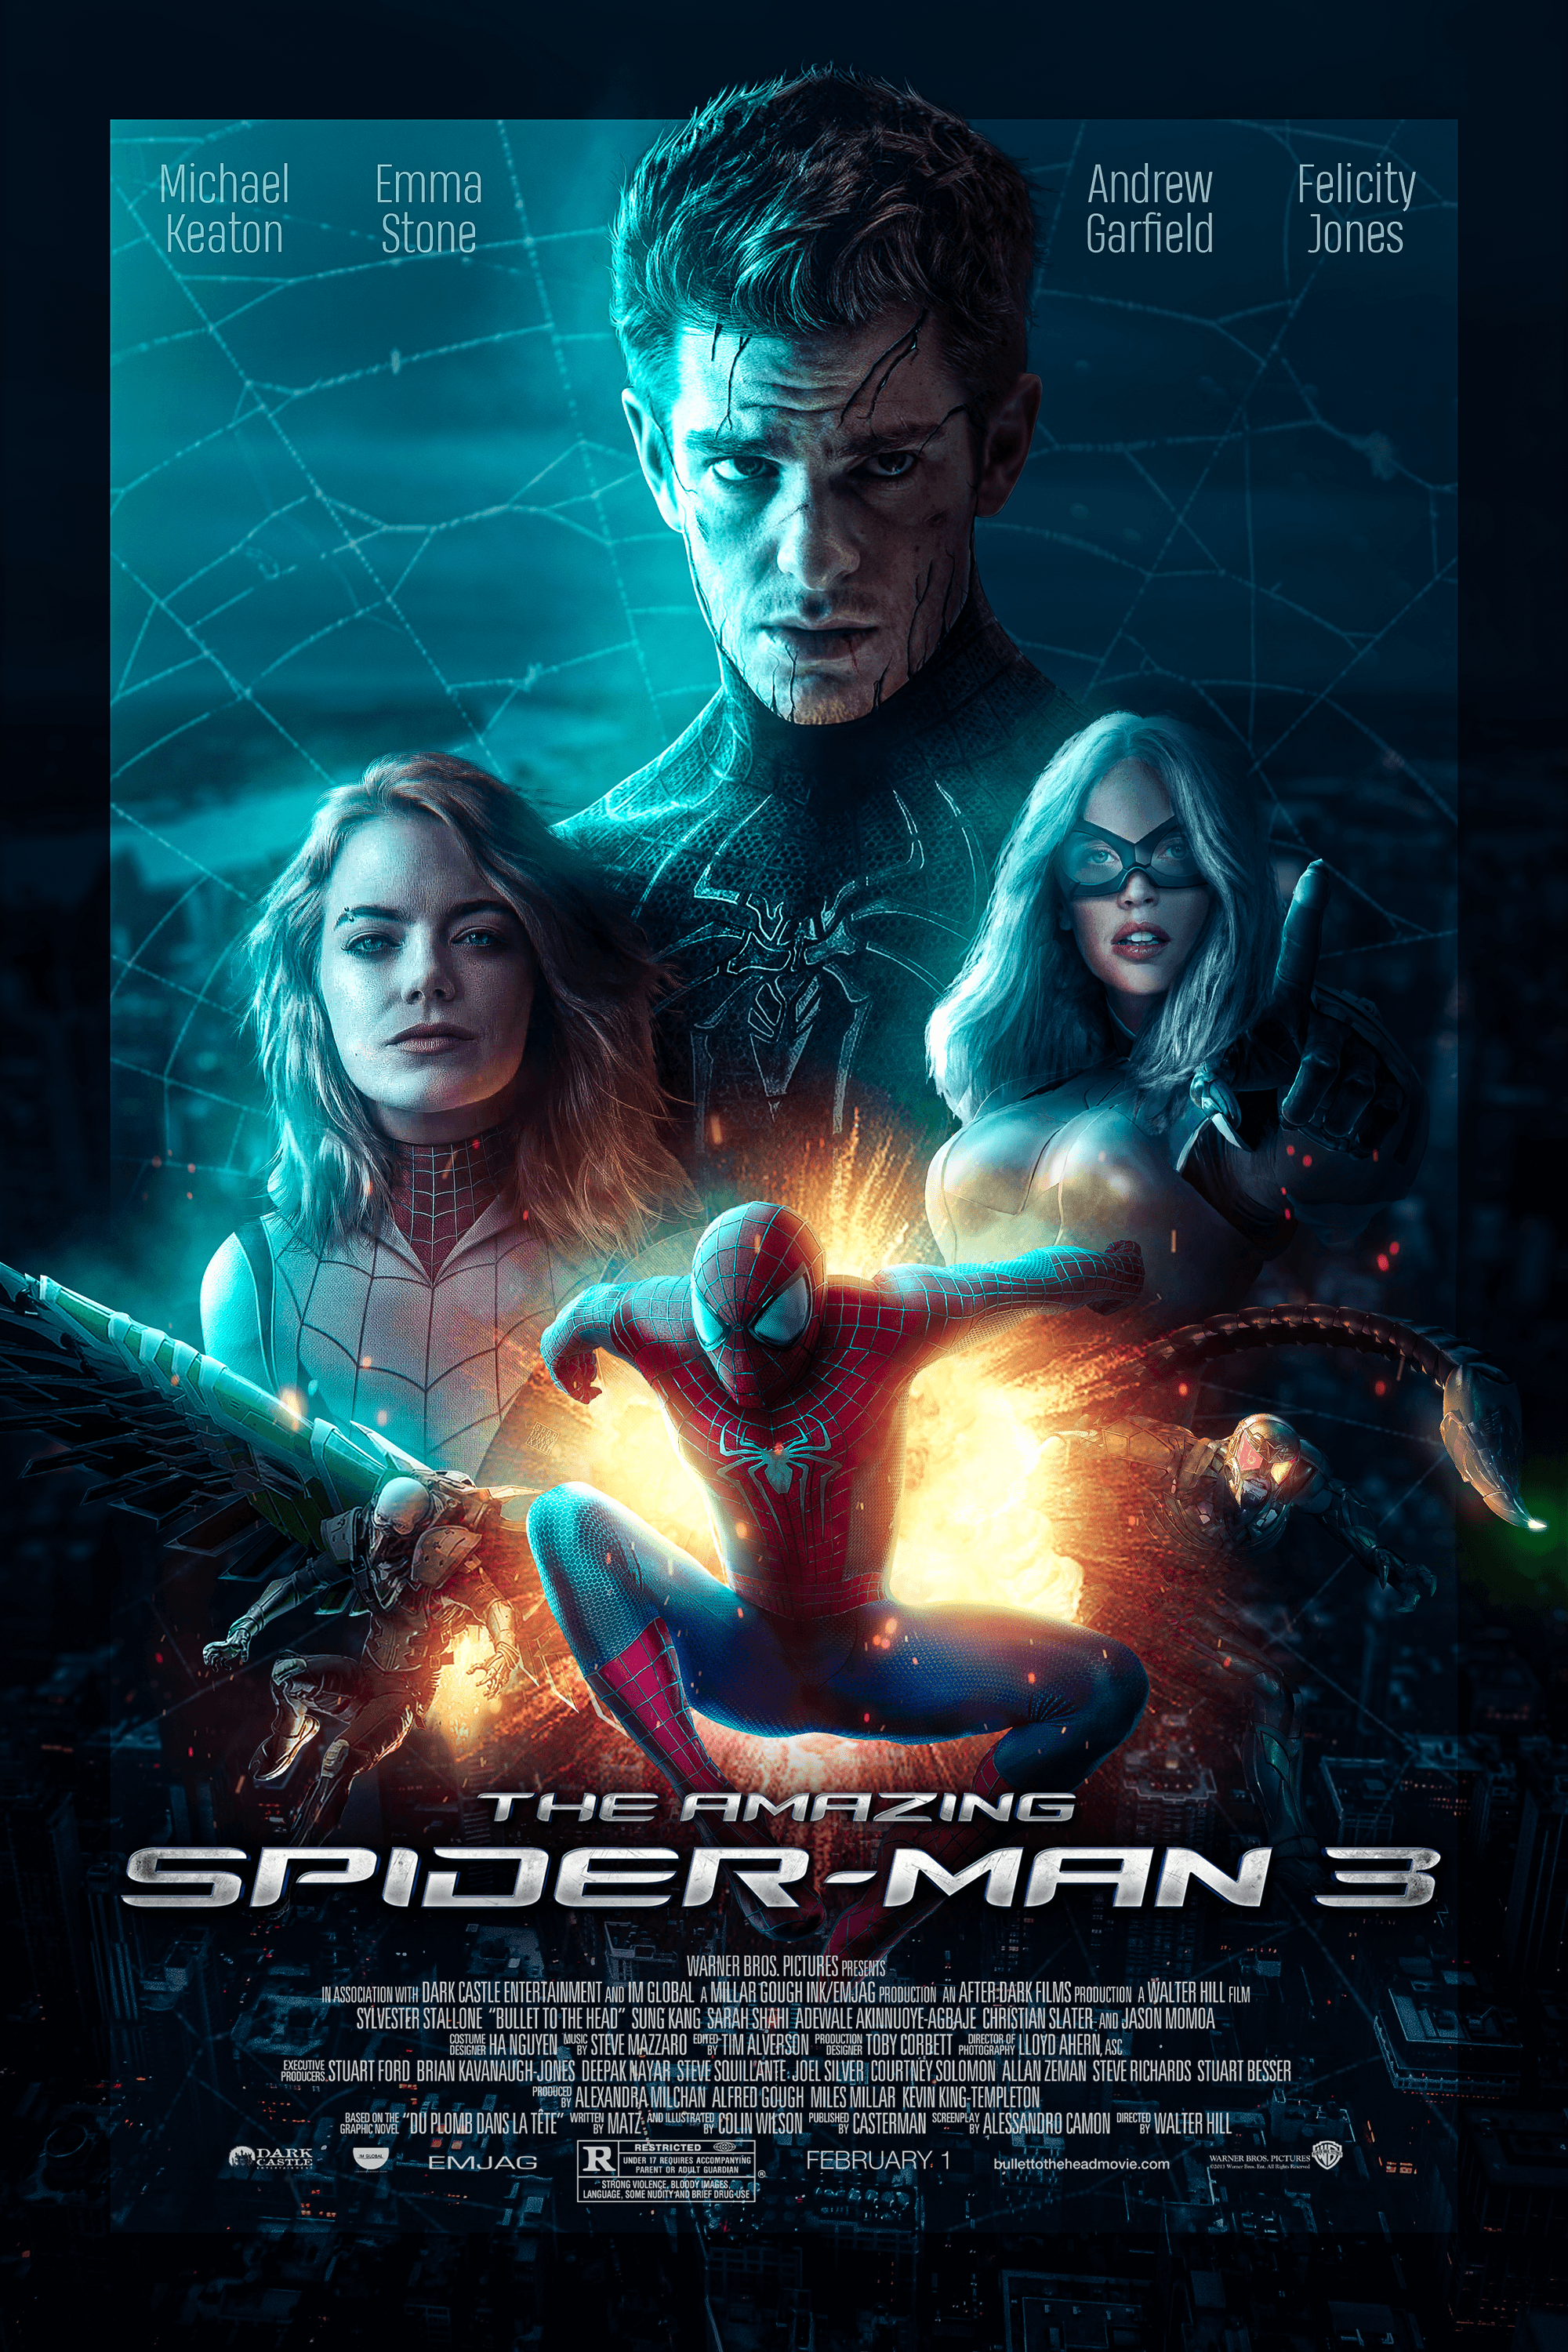 The Amazing Spider Man 3  Movie Poster - by Pietro Boza - My Own